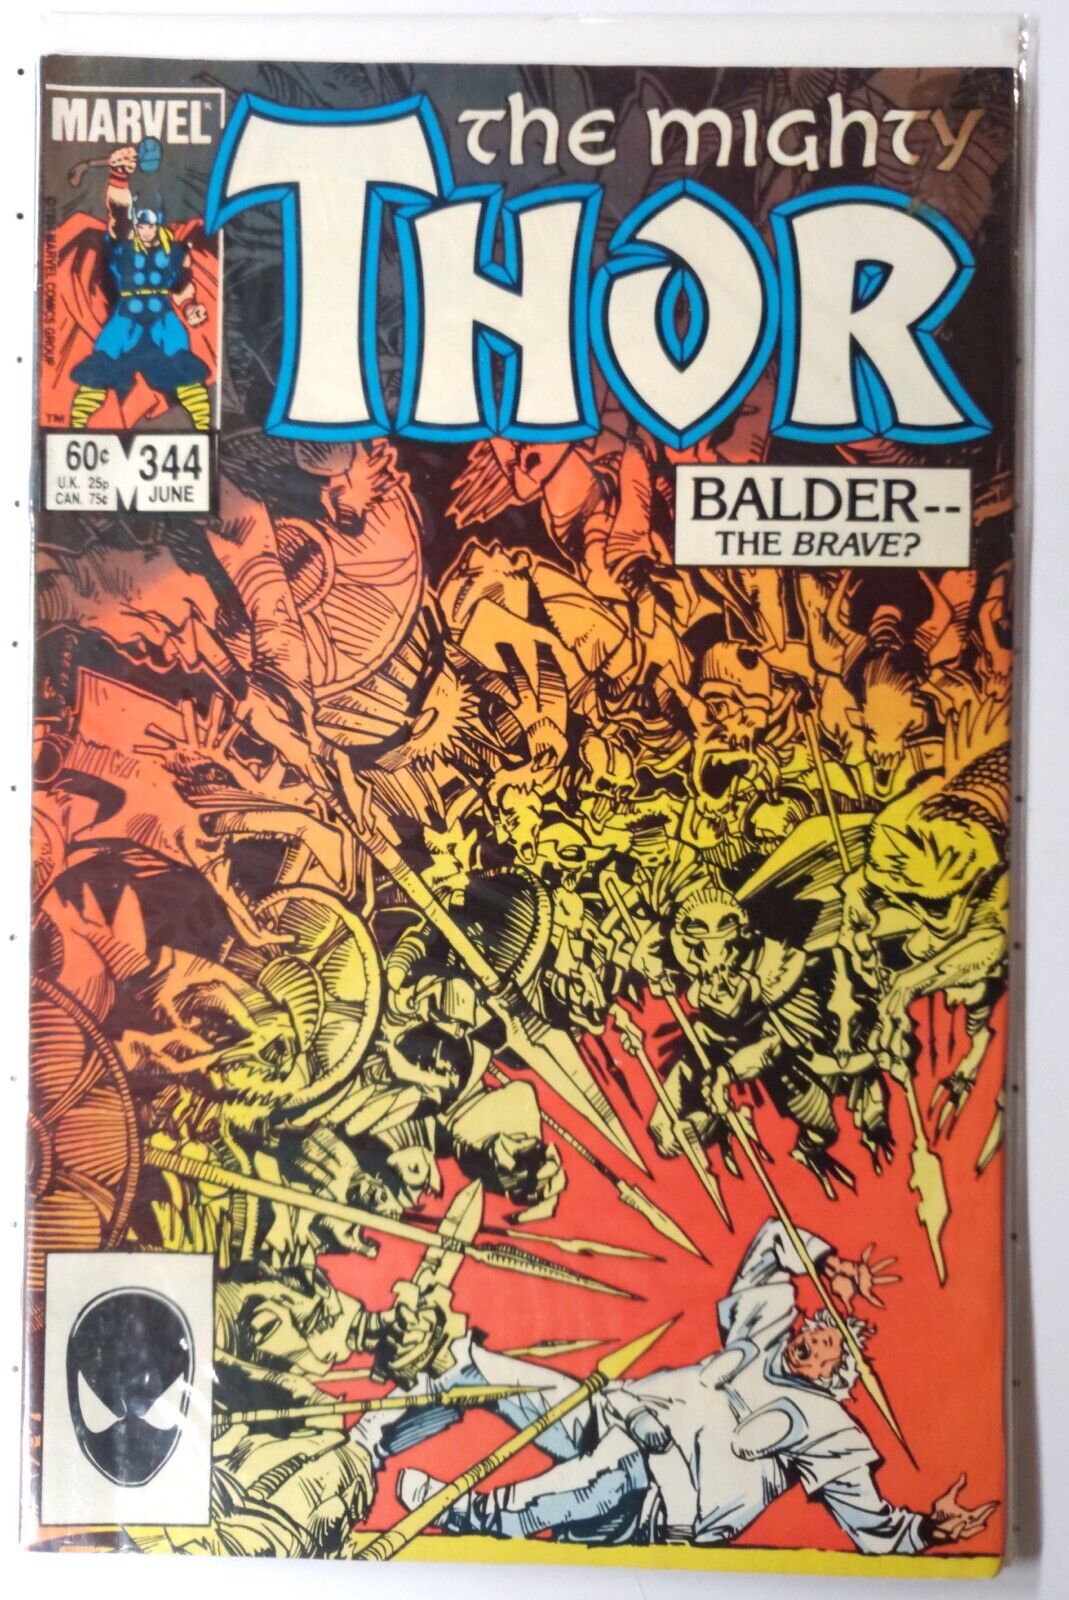 The Mighty Thor #344 Marvel FN 1st appearance Malekith The Accursed